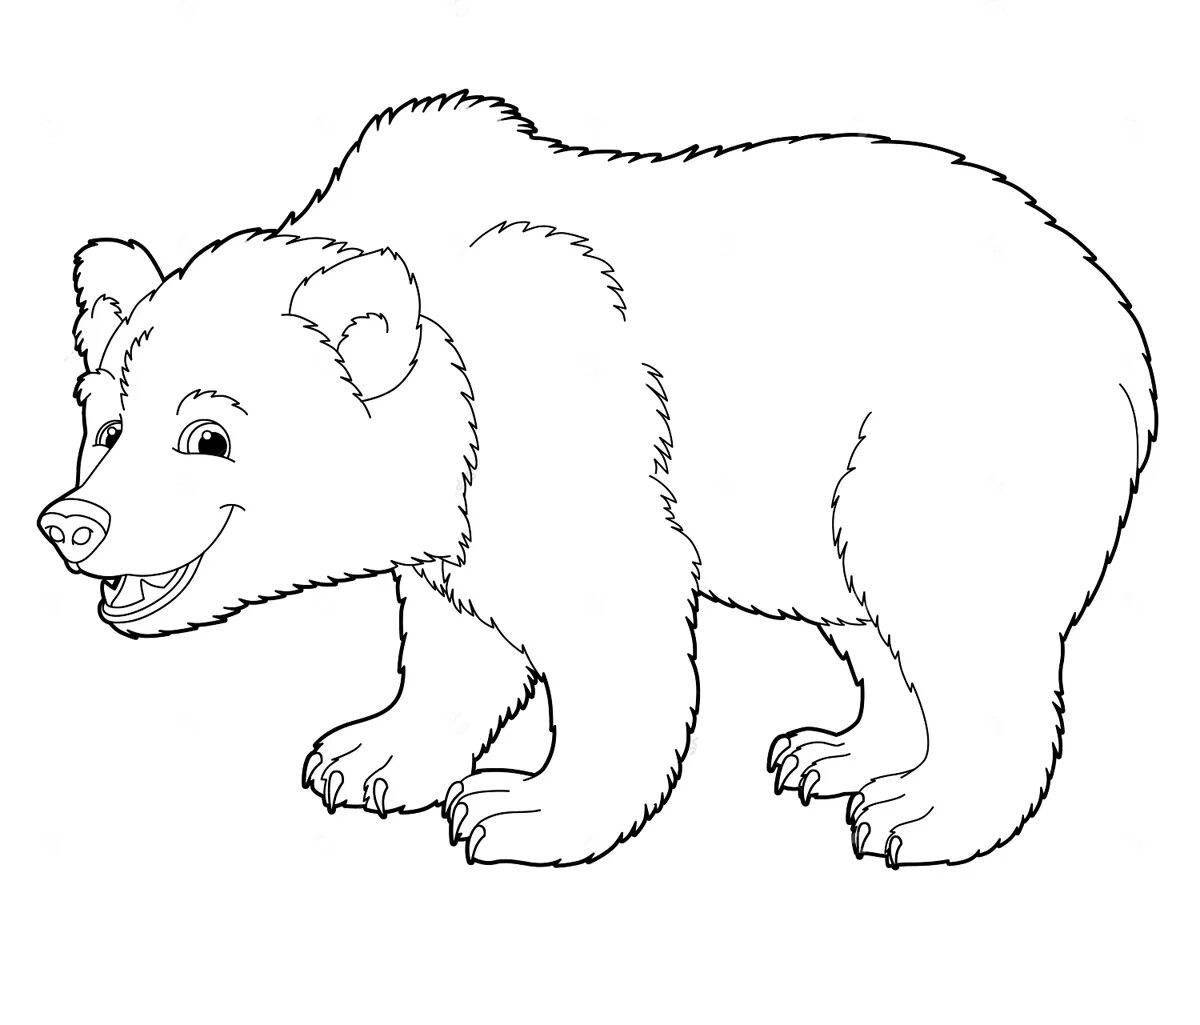 Colorful coloring pages of wild animals for children 2-3 years old